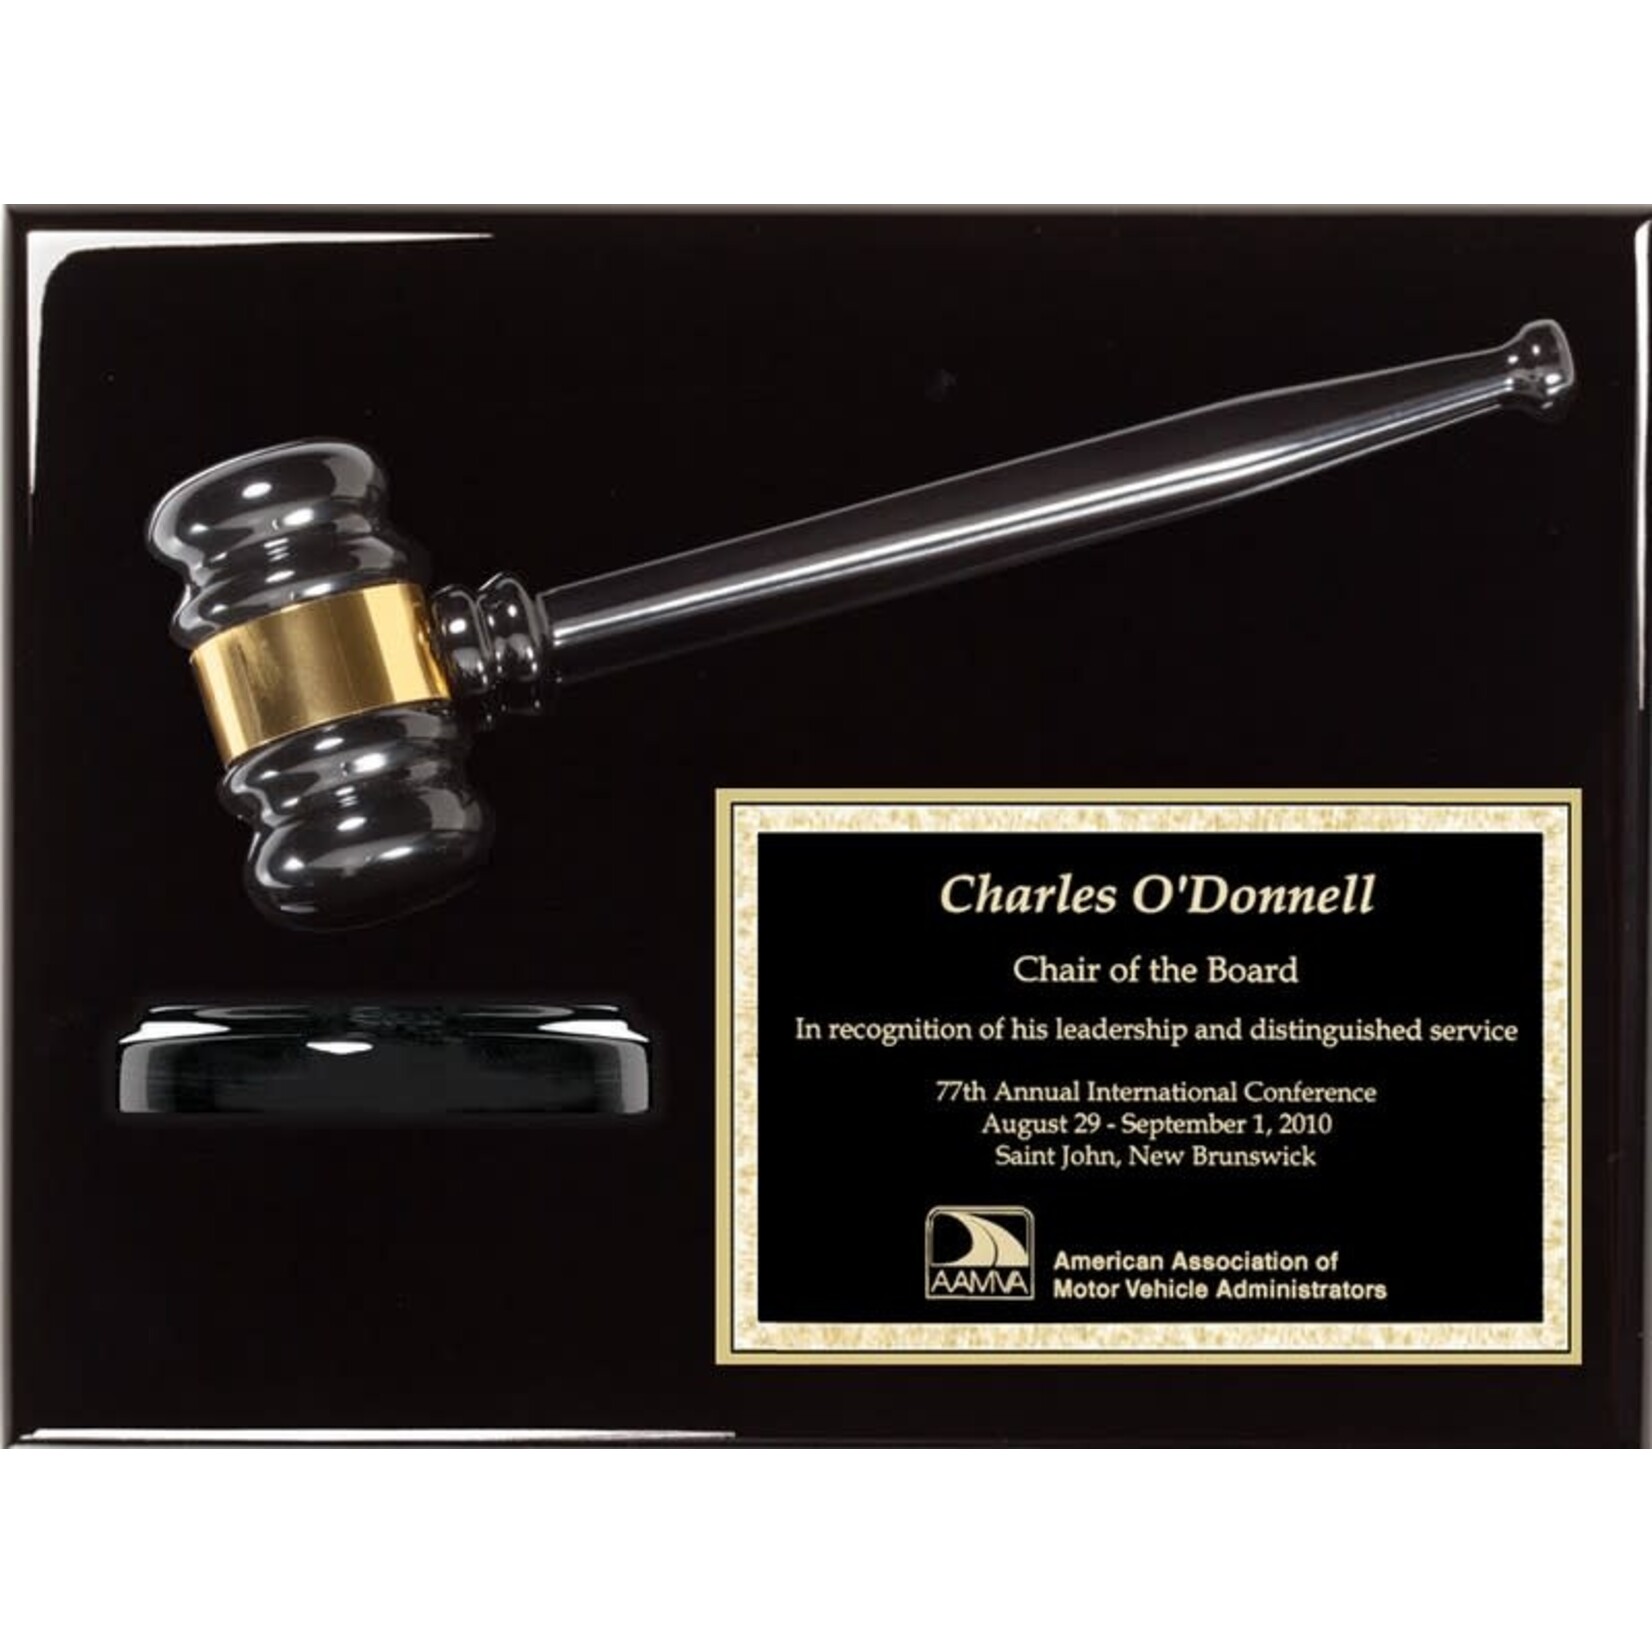 Marco AGP-60PL Gavel Plaque includes engraving